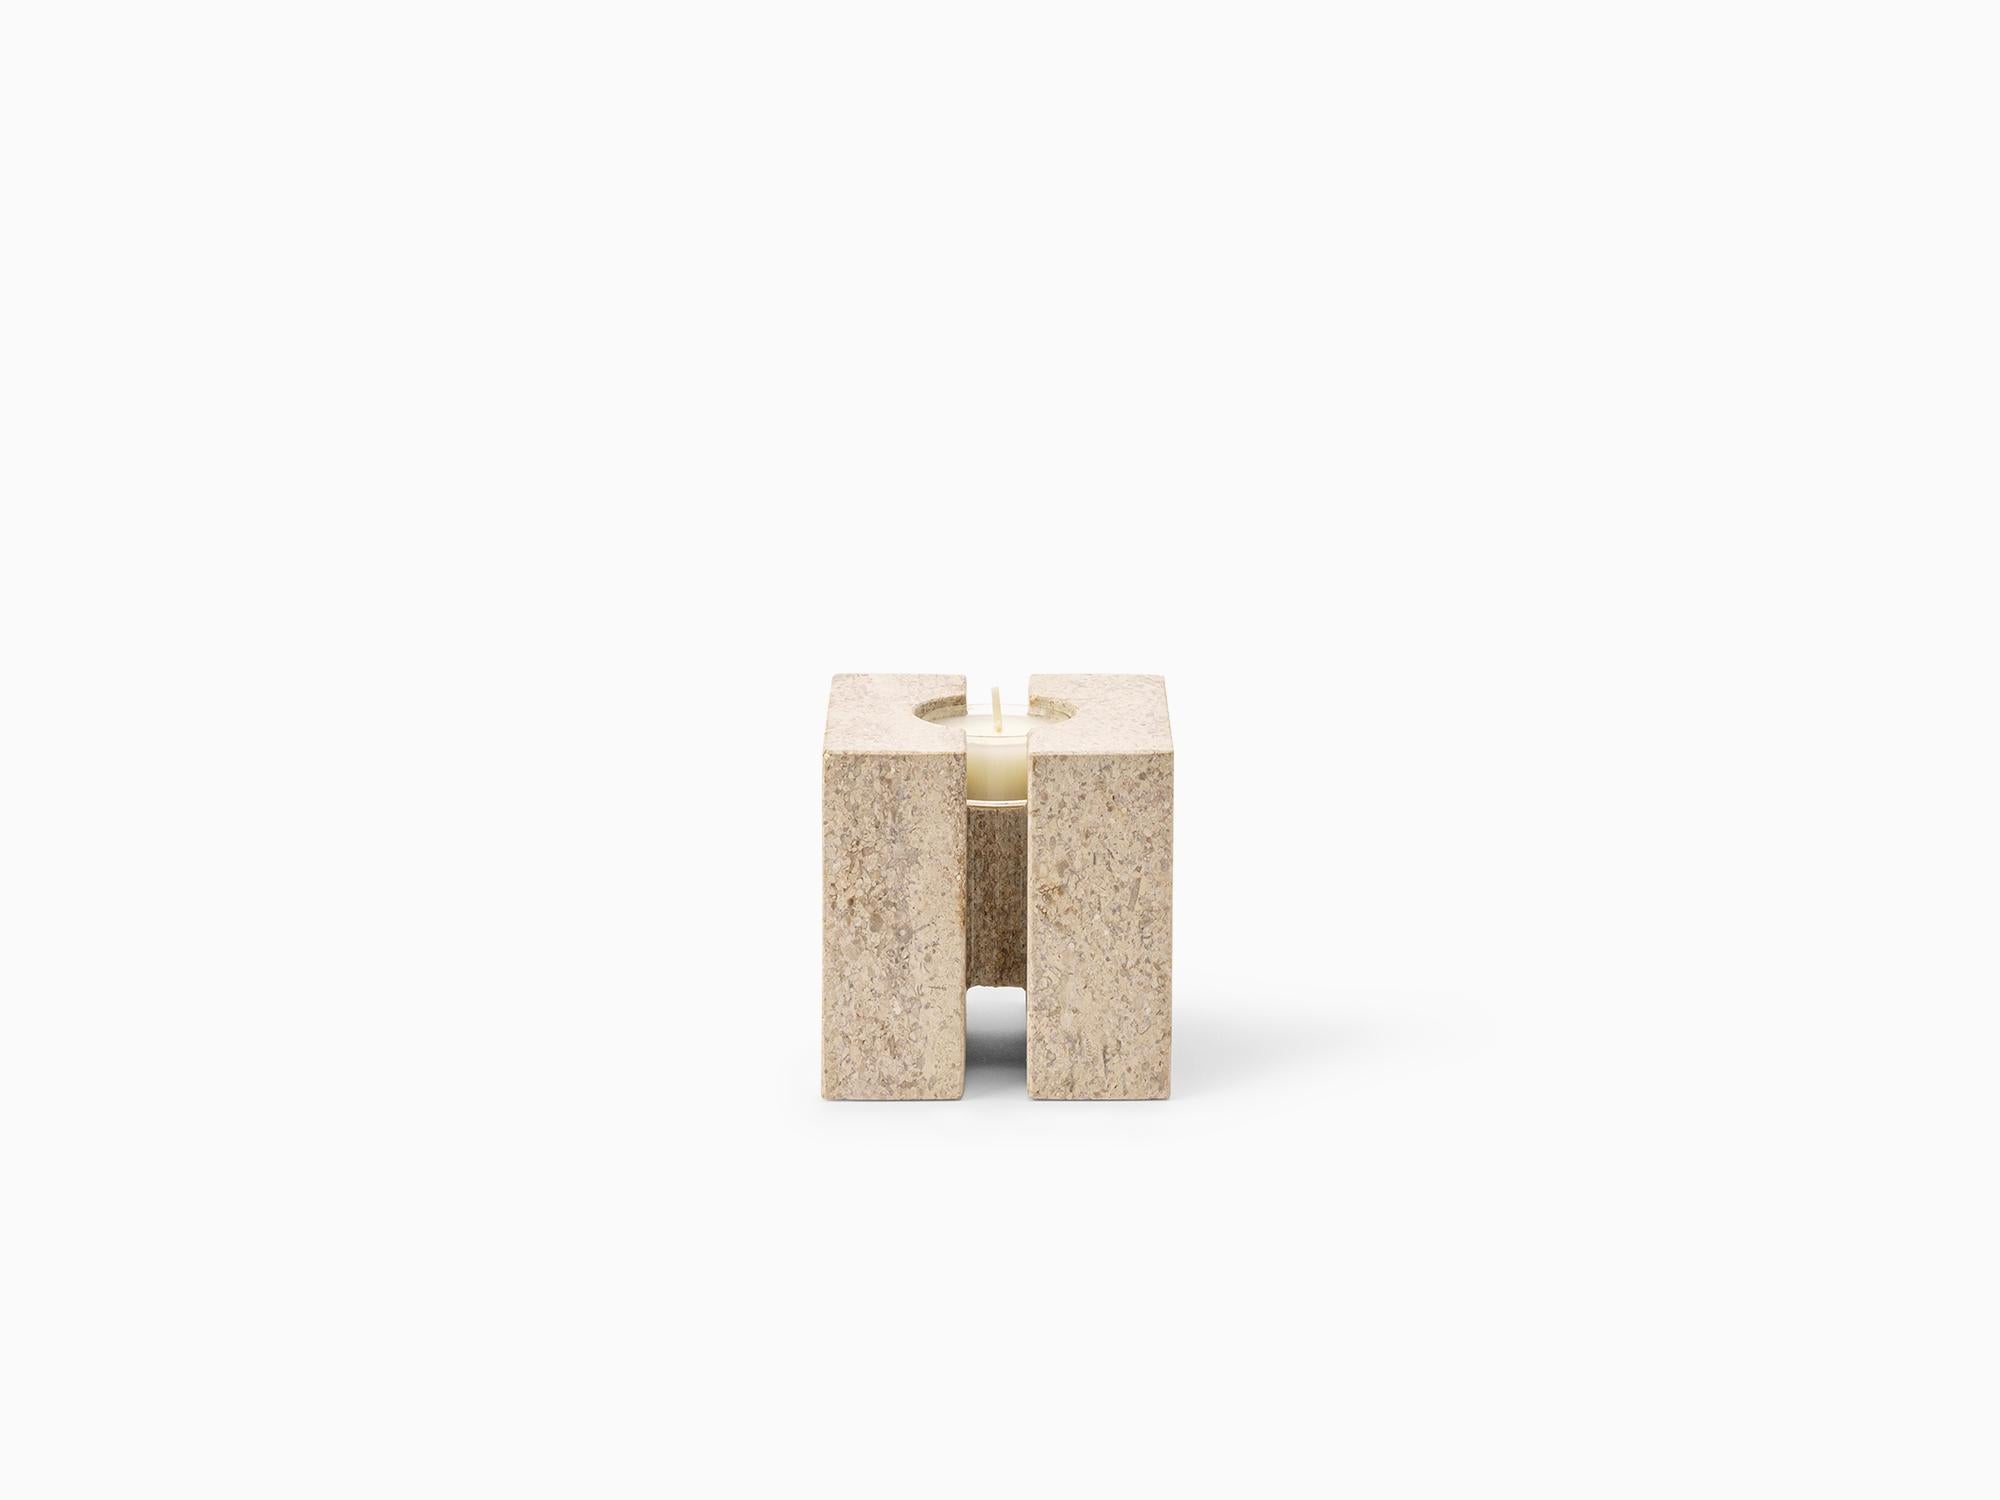 LEVE candleholders, a creation by the renowned designer Birgitte Due Madsen, are inspired not only by her former work centered around geometry and abstract sculptural fragments, but also the old Italian masters like Tobia Scarpa, futuristic